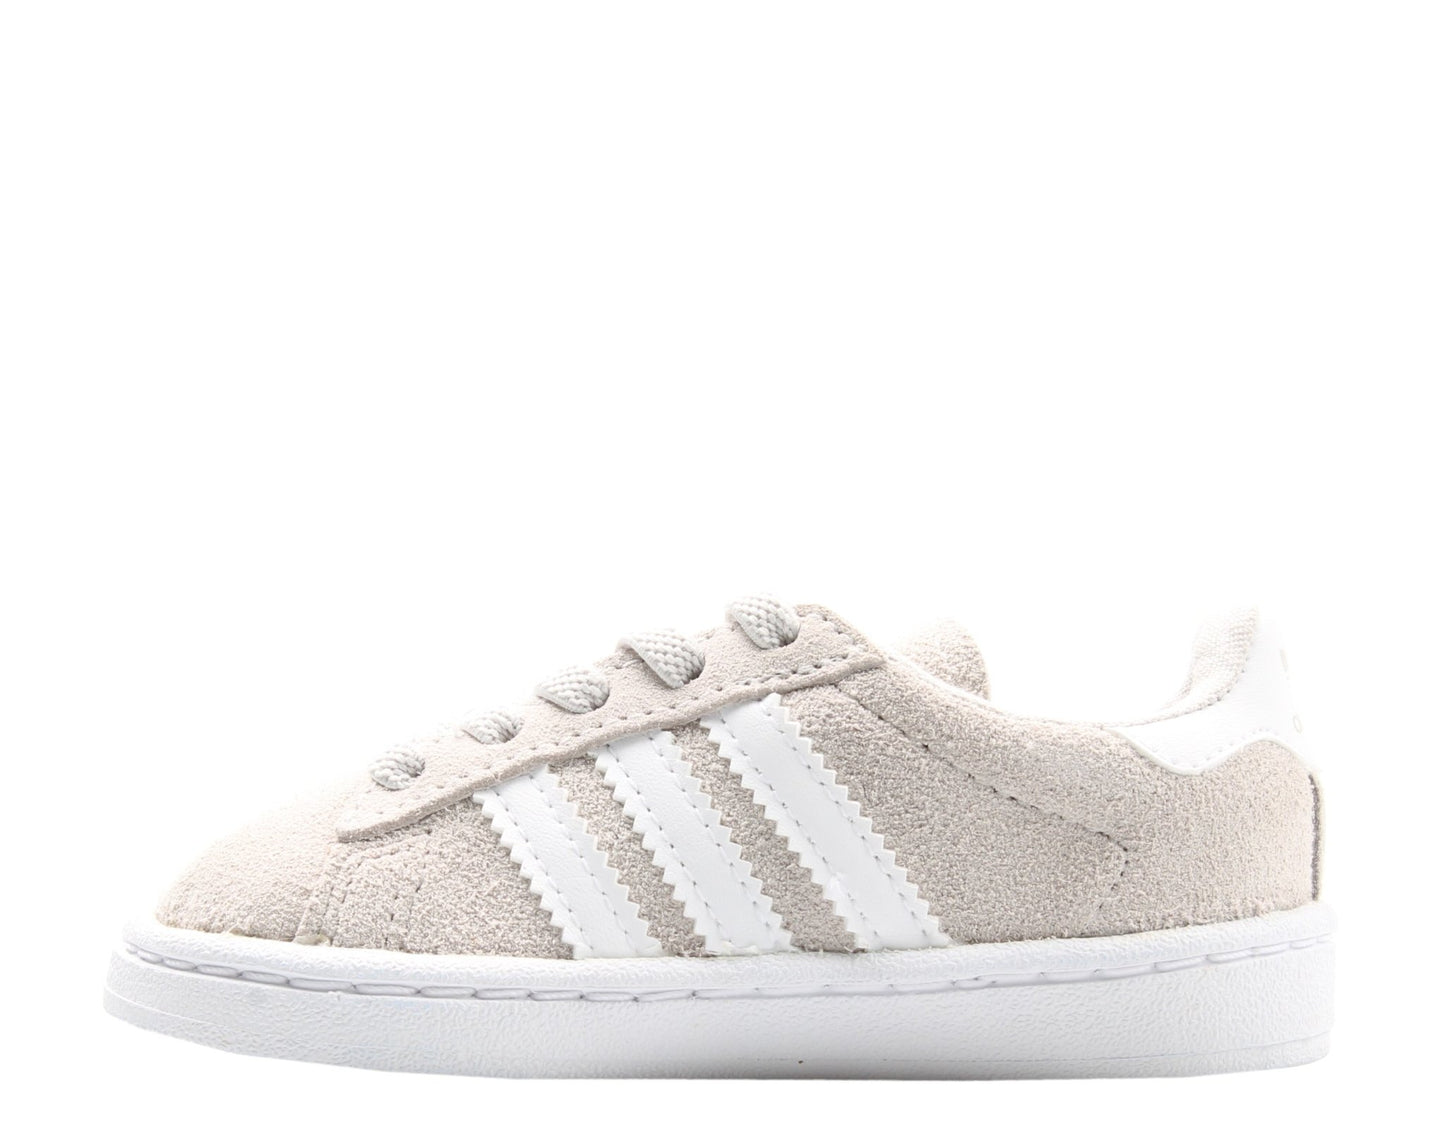 Adidas Originals Campus EL I Infant Grey/White Little Kids Casual Shoes BY9595 - Becauze